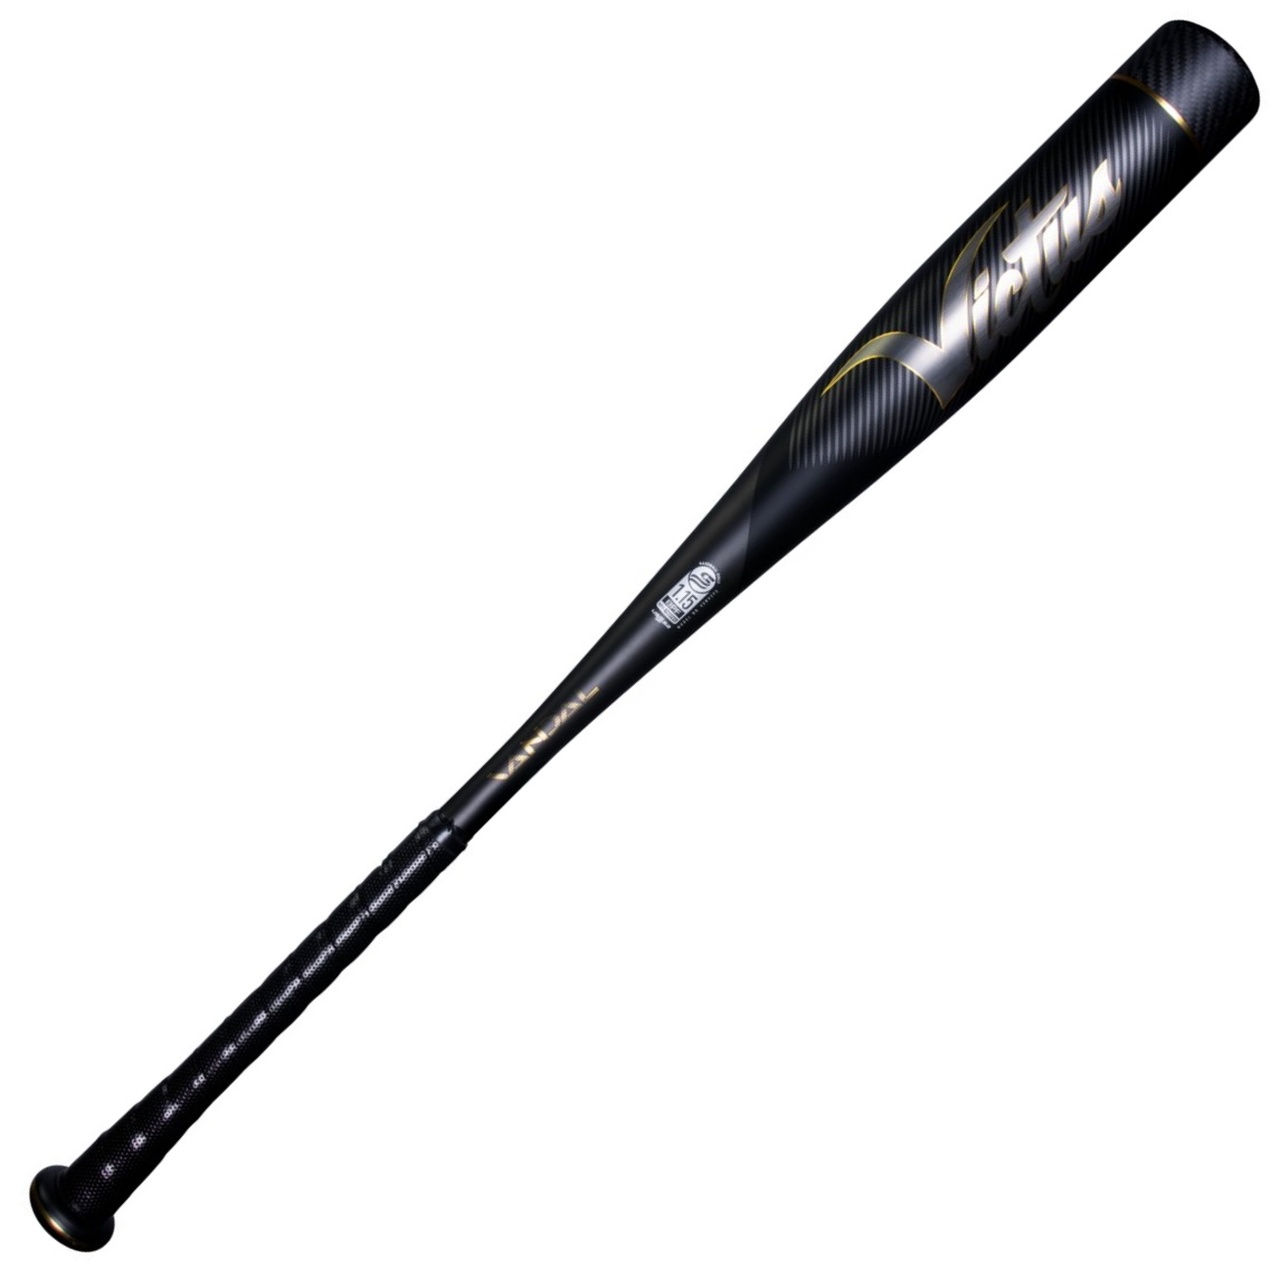 victus-vandal-2-3-baseball-bat-31-inch-28-oz VCBV2-3128 Victus  In baseball speed is everything. That’s why Victus designed the Vandal using